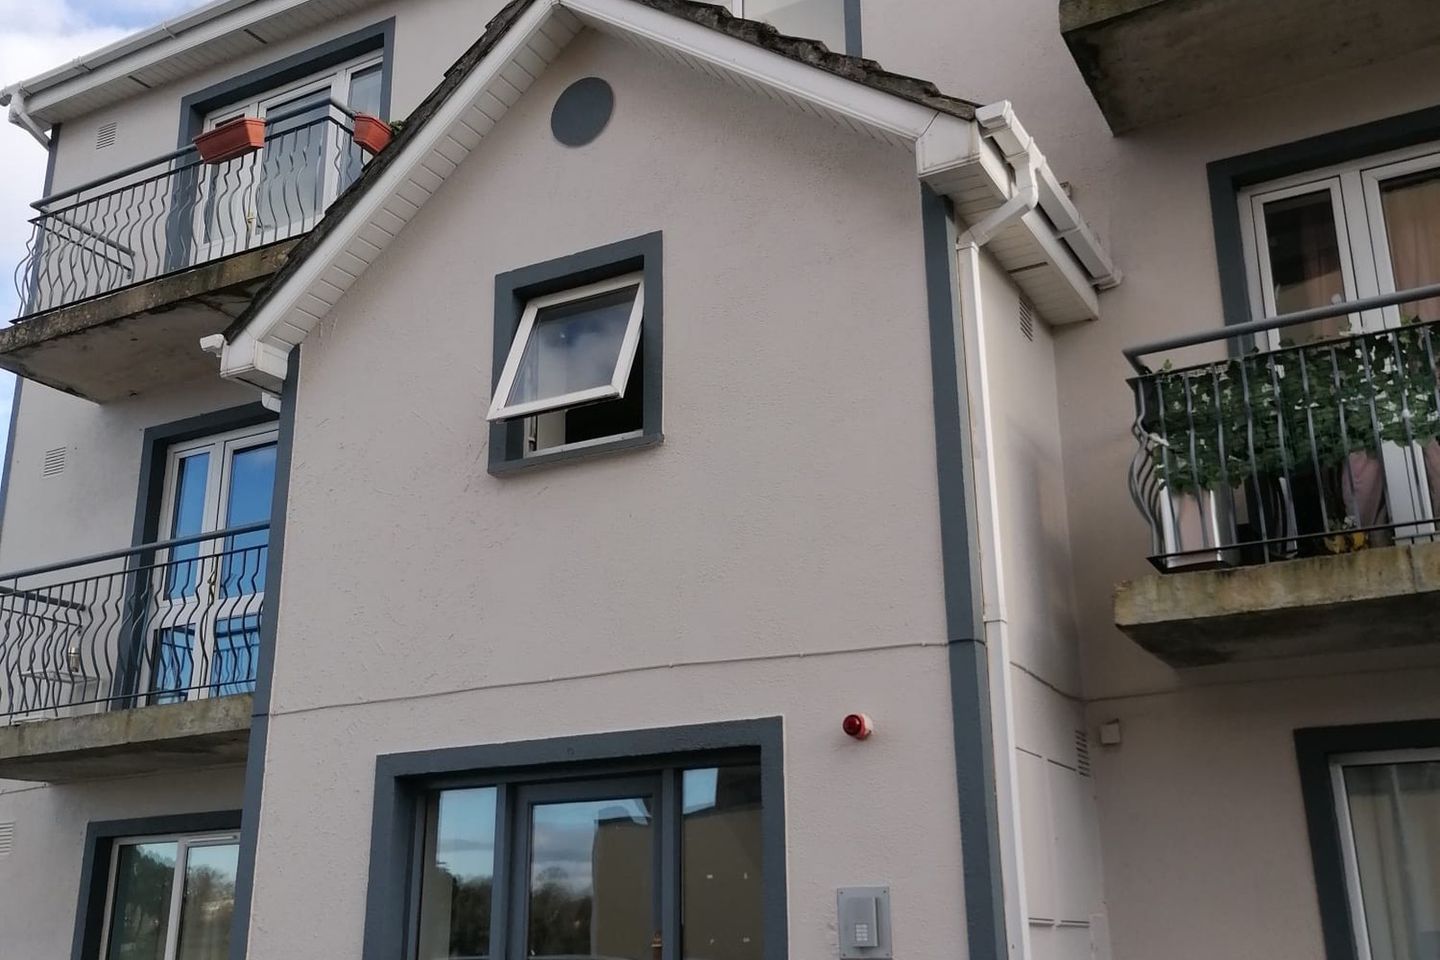 Apartment 5, Suir House, Waterford City, Co. Waterford, X91D588